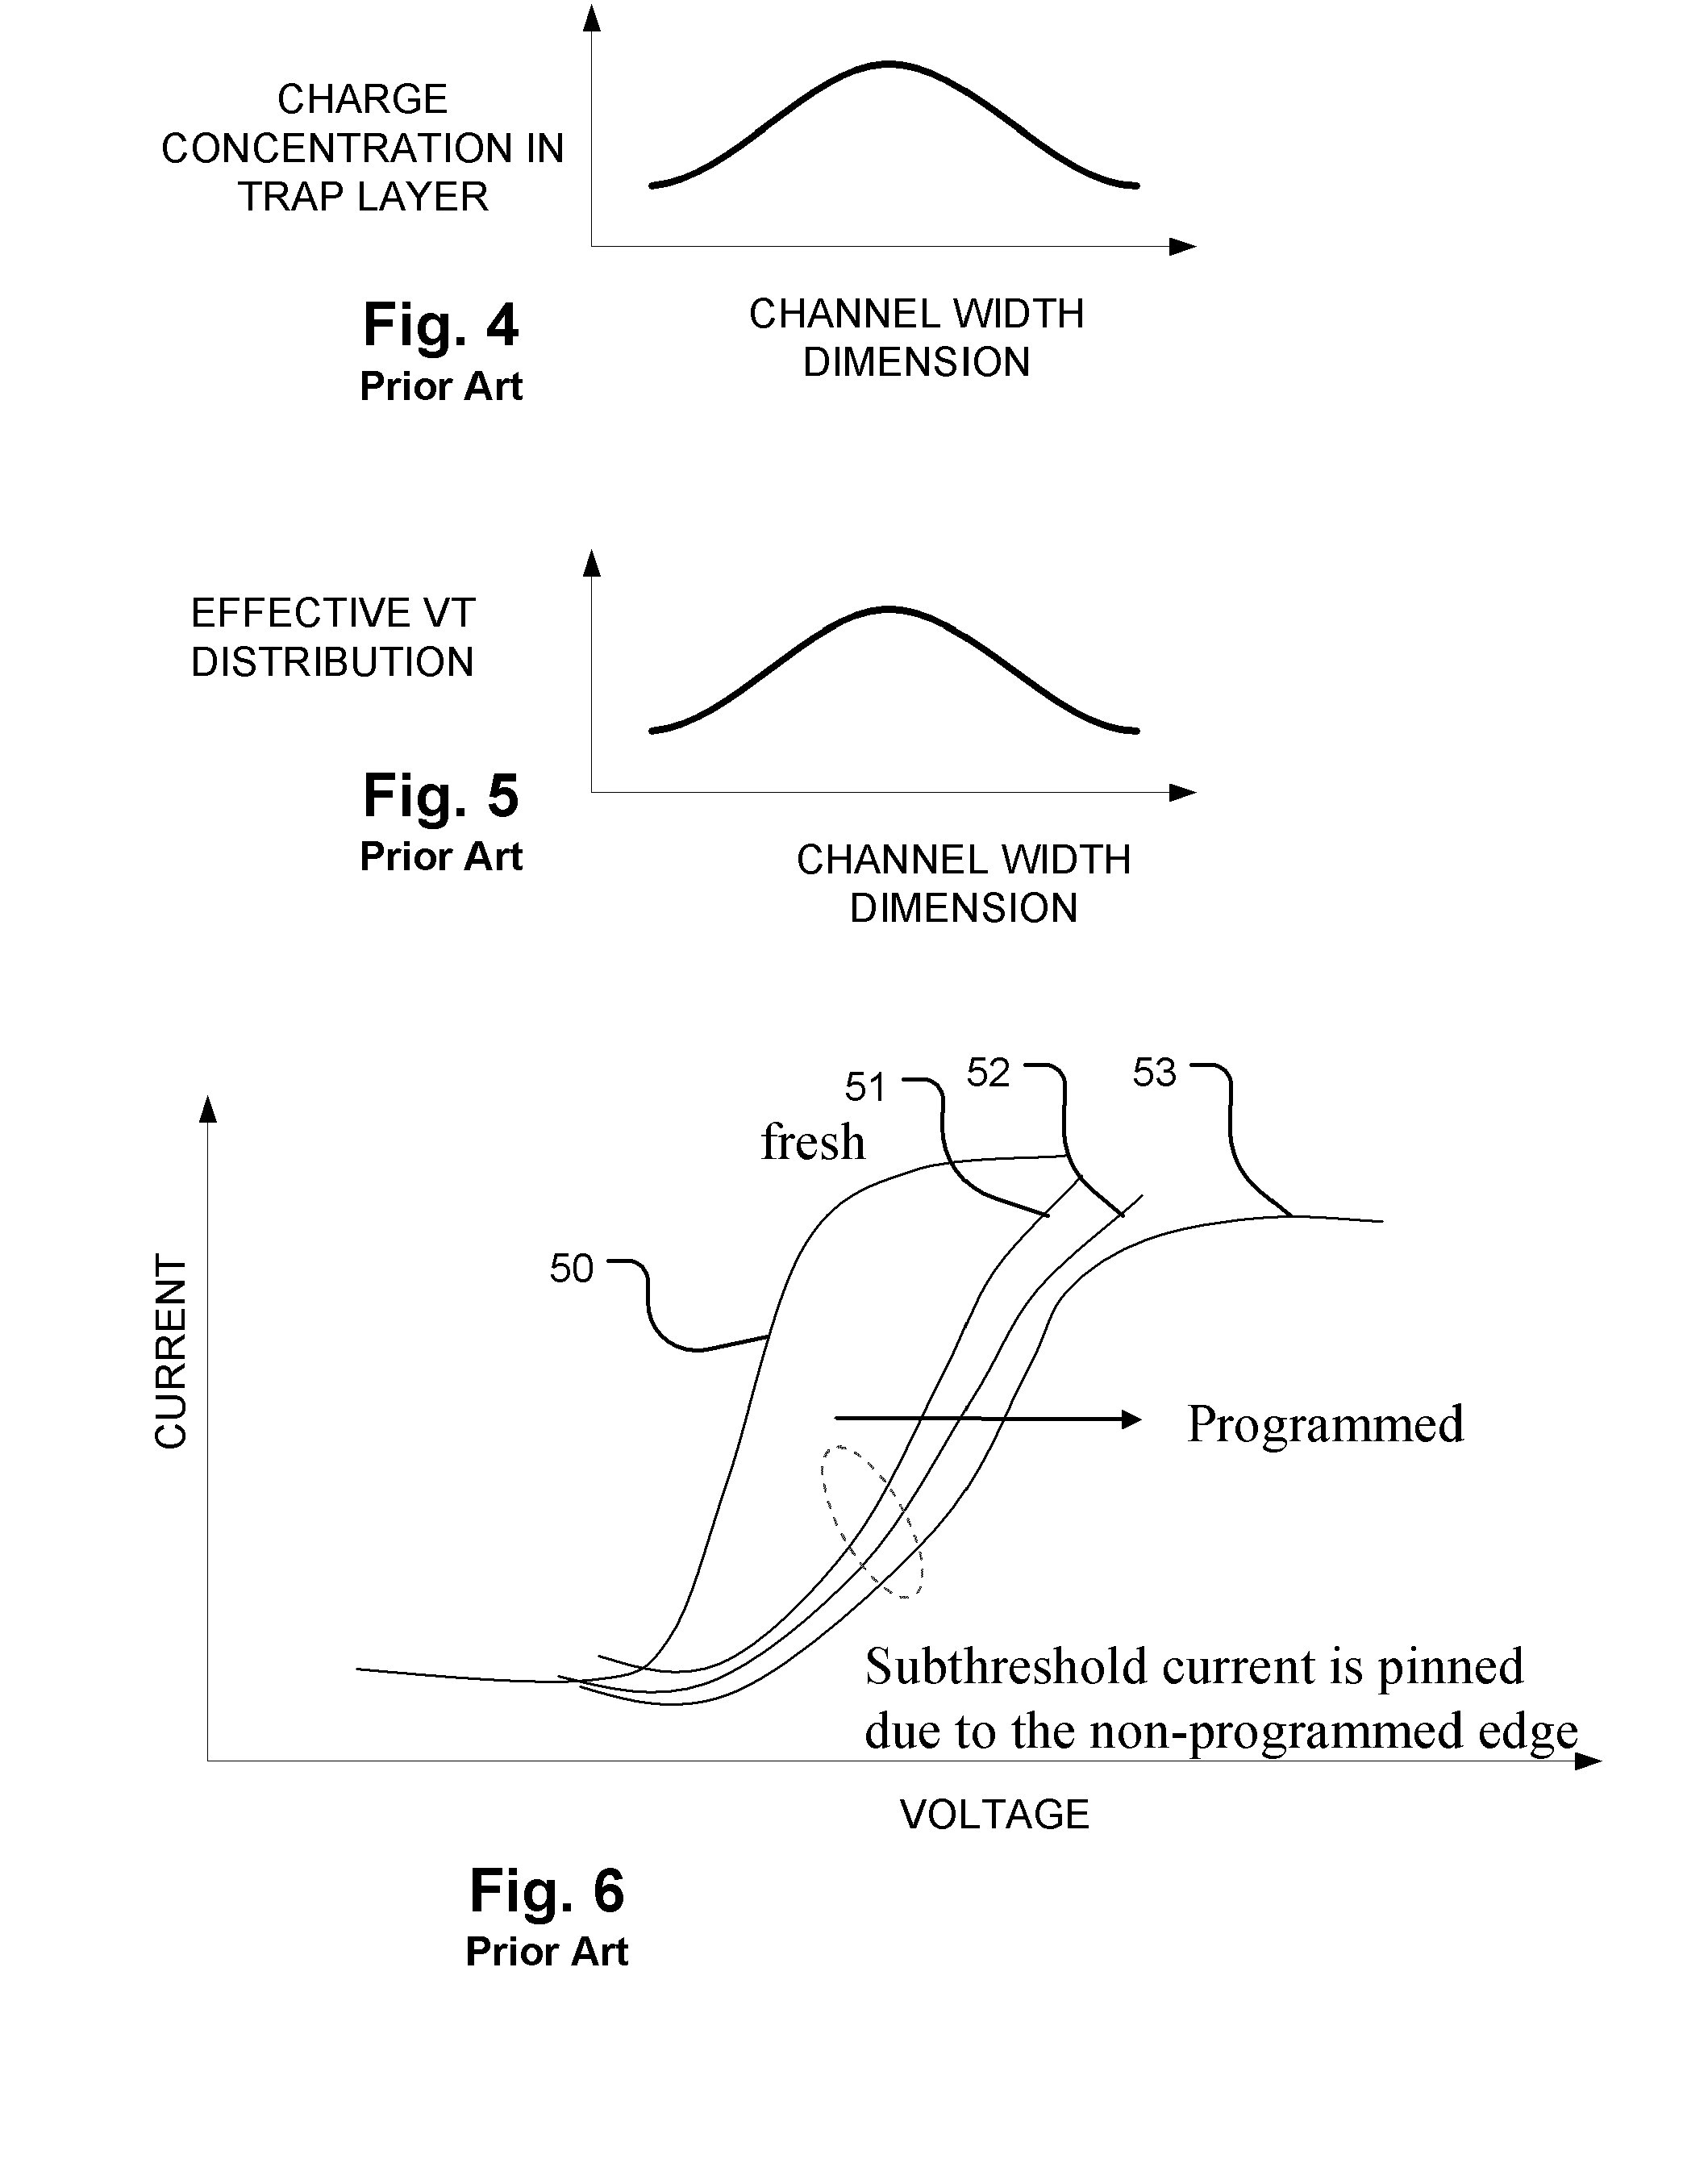 Floating gate memory device with interpoly charge trapping structure